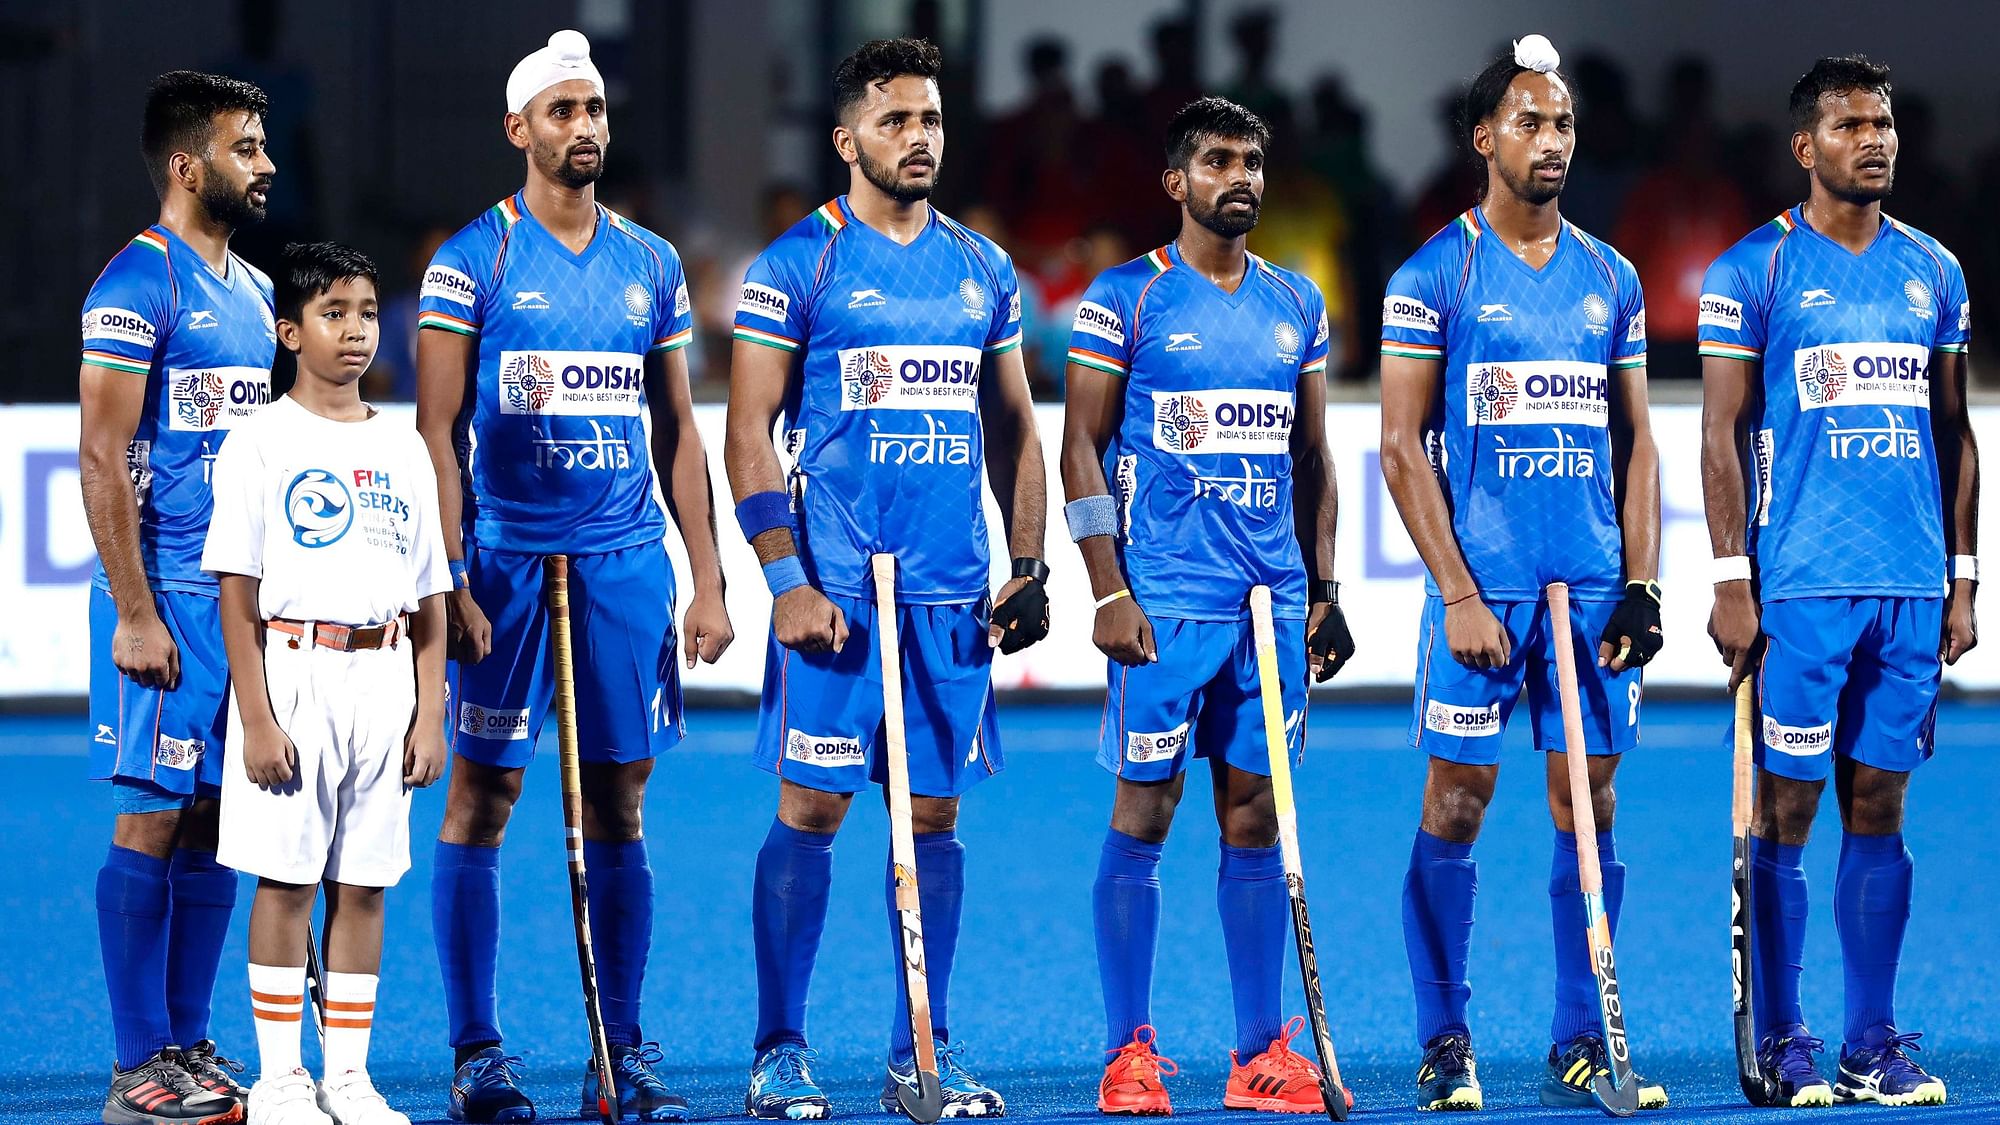 Bhubaneswar will host India’s home matches during the 2020 Hockey Pro League.